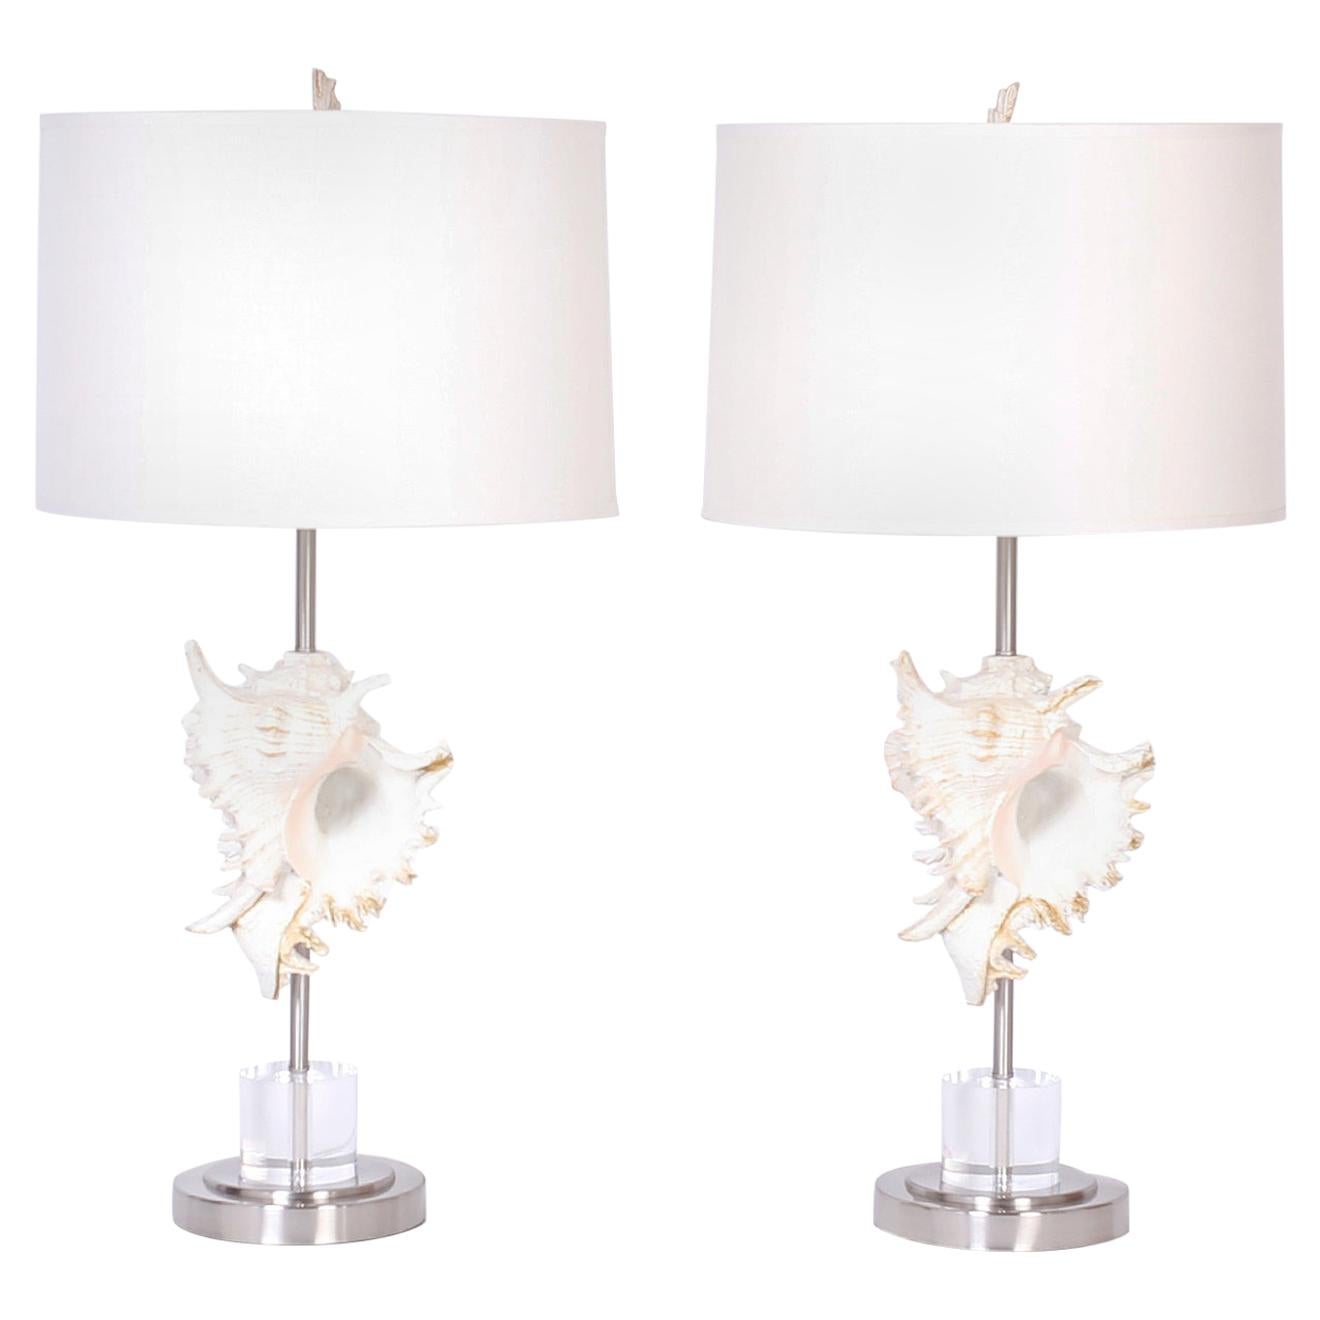 Pair of Murex Shell Table Lamps